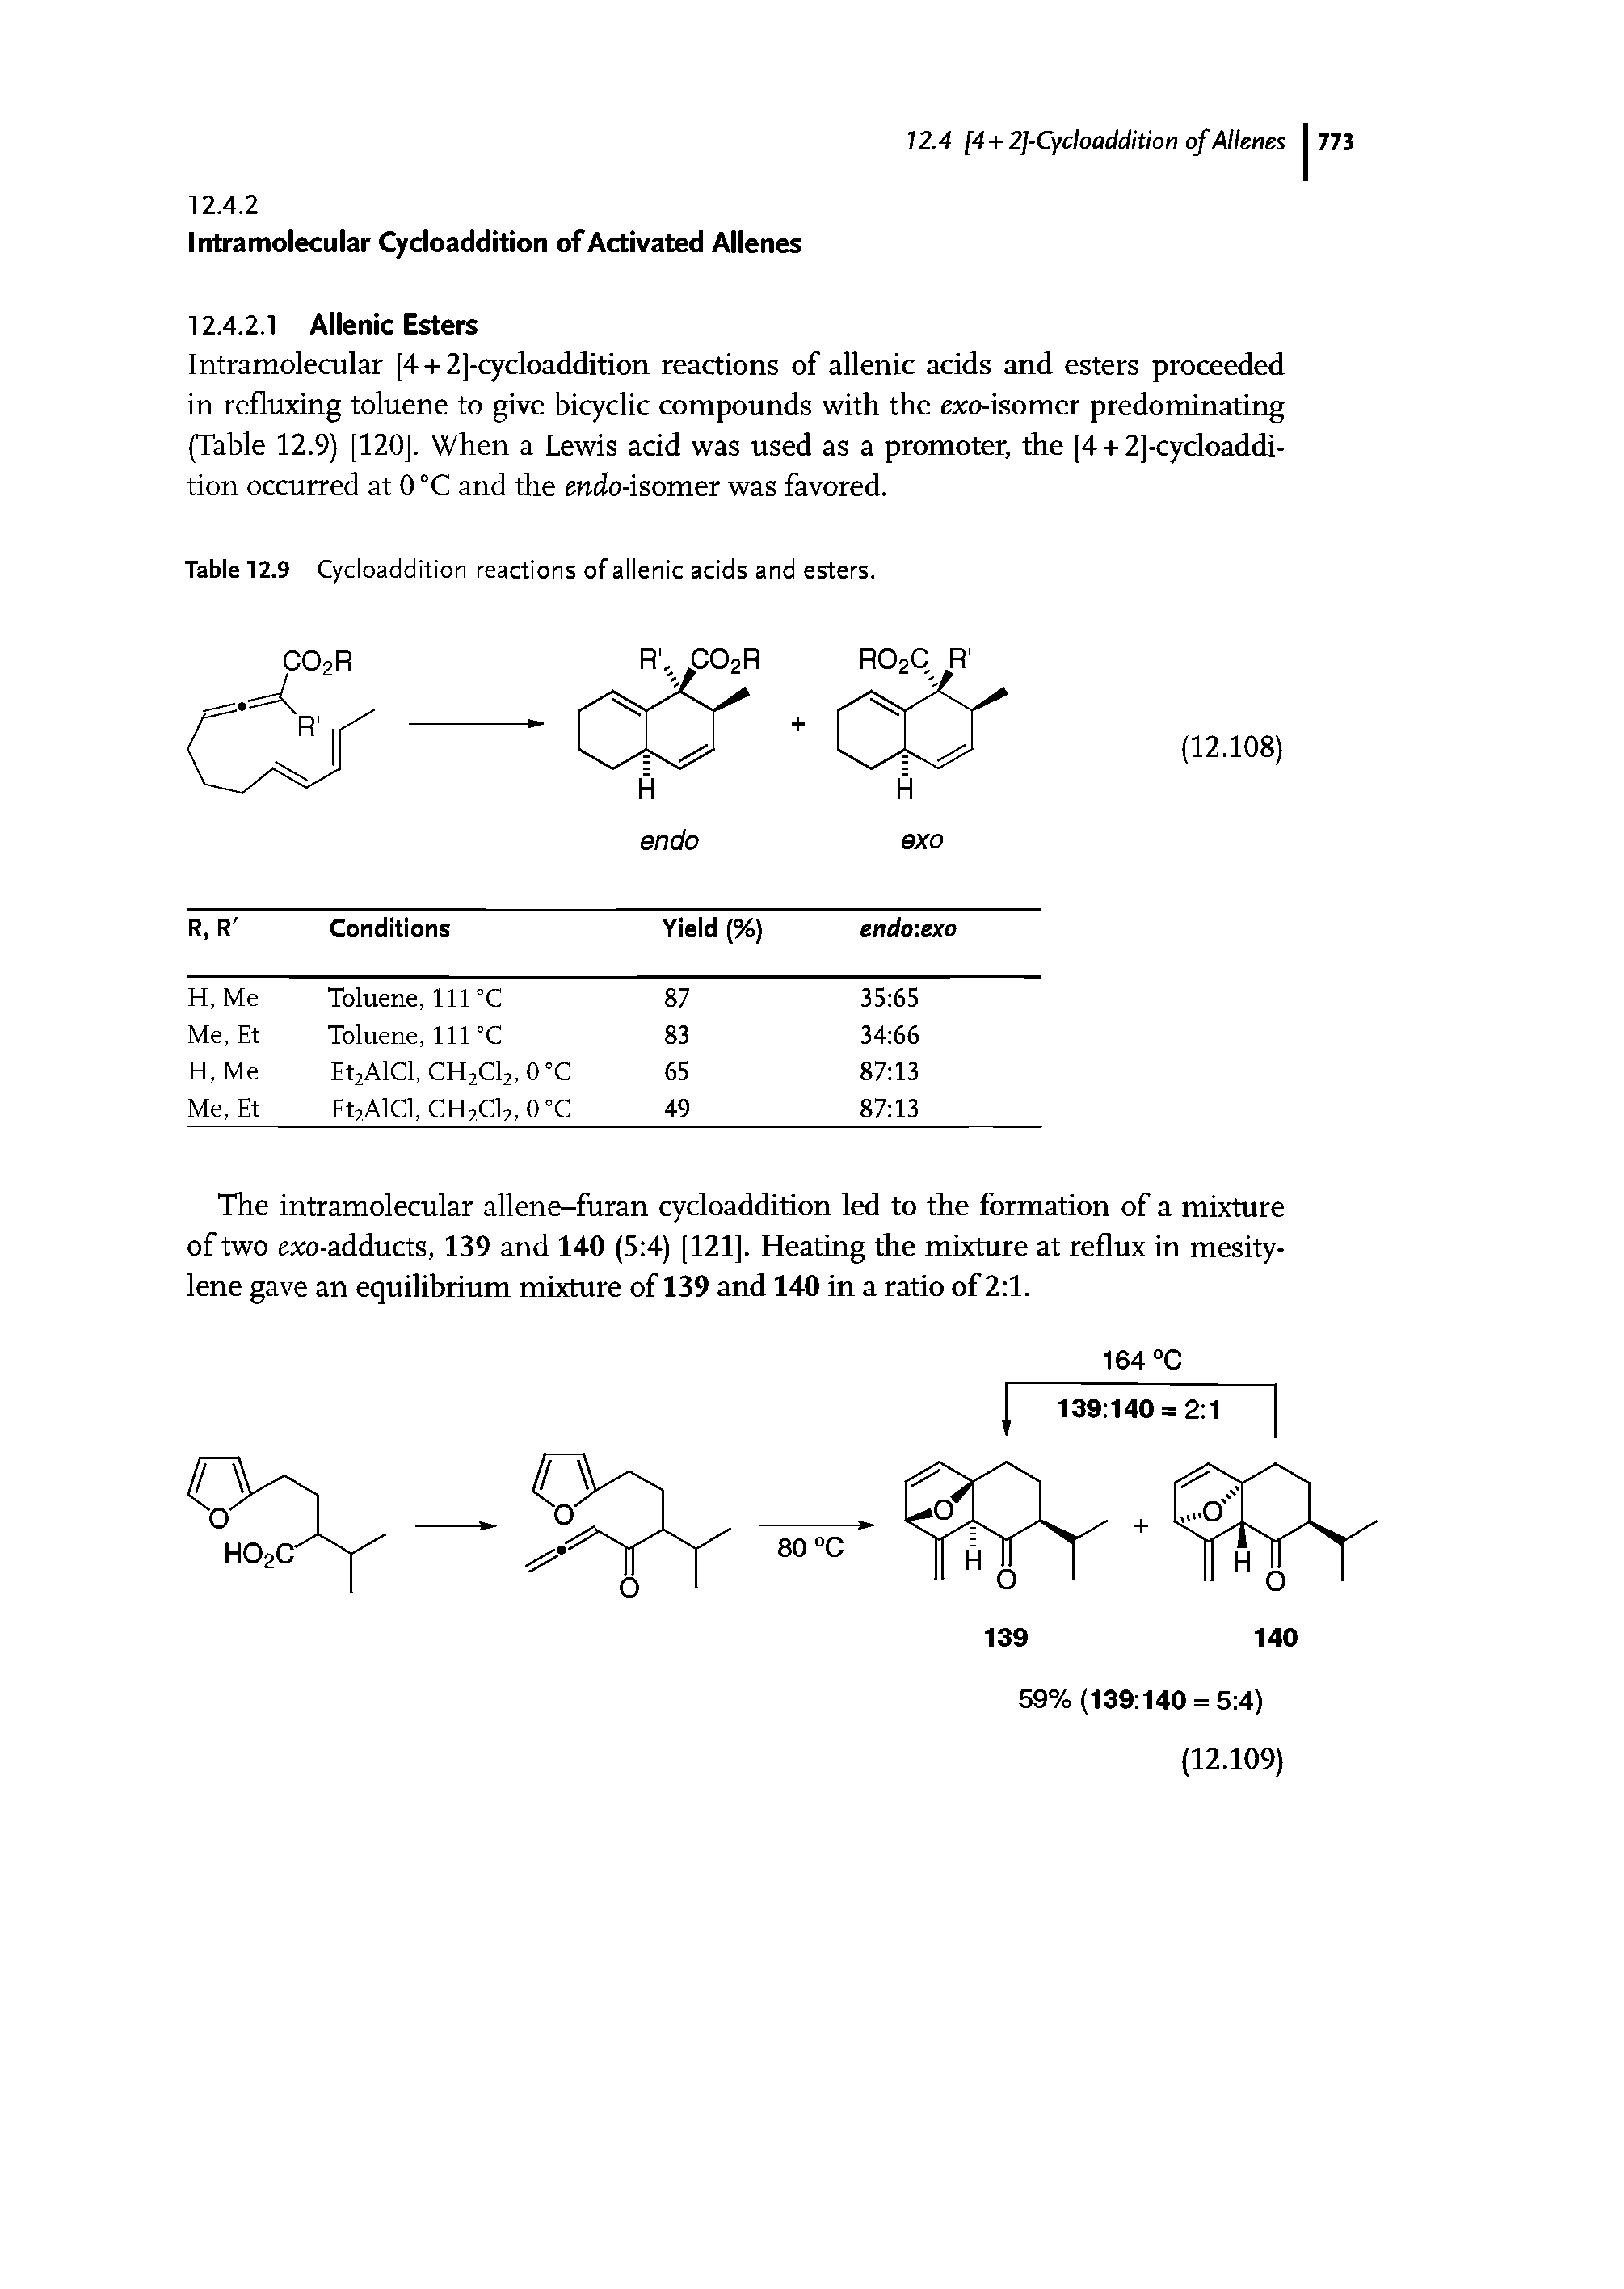 Table 12.9 Cycloaddition reactions of allenic acids and esters.